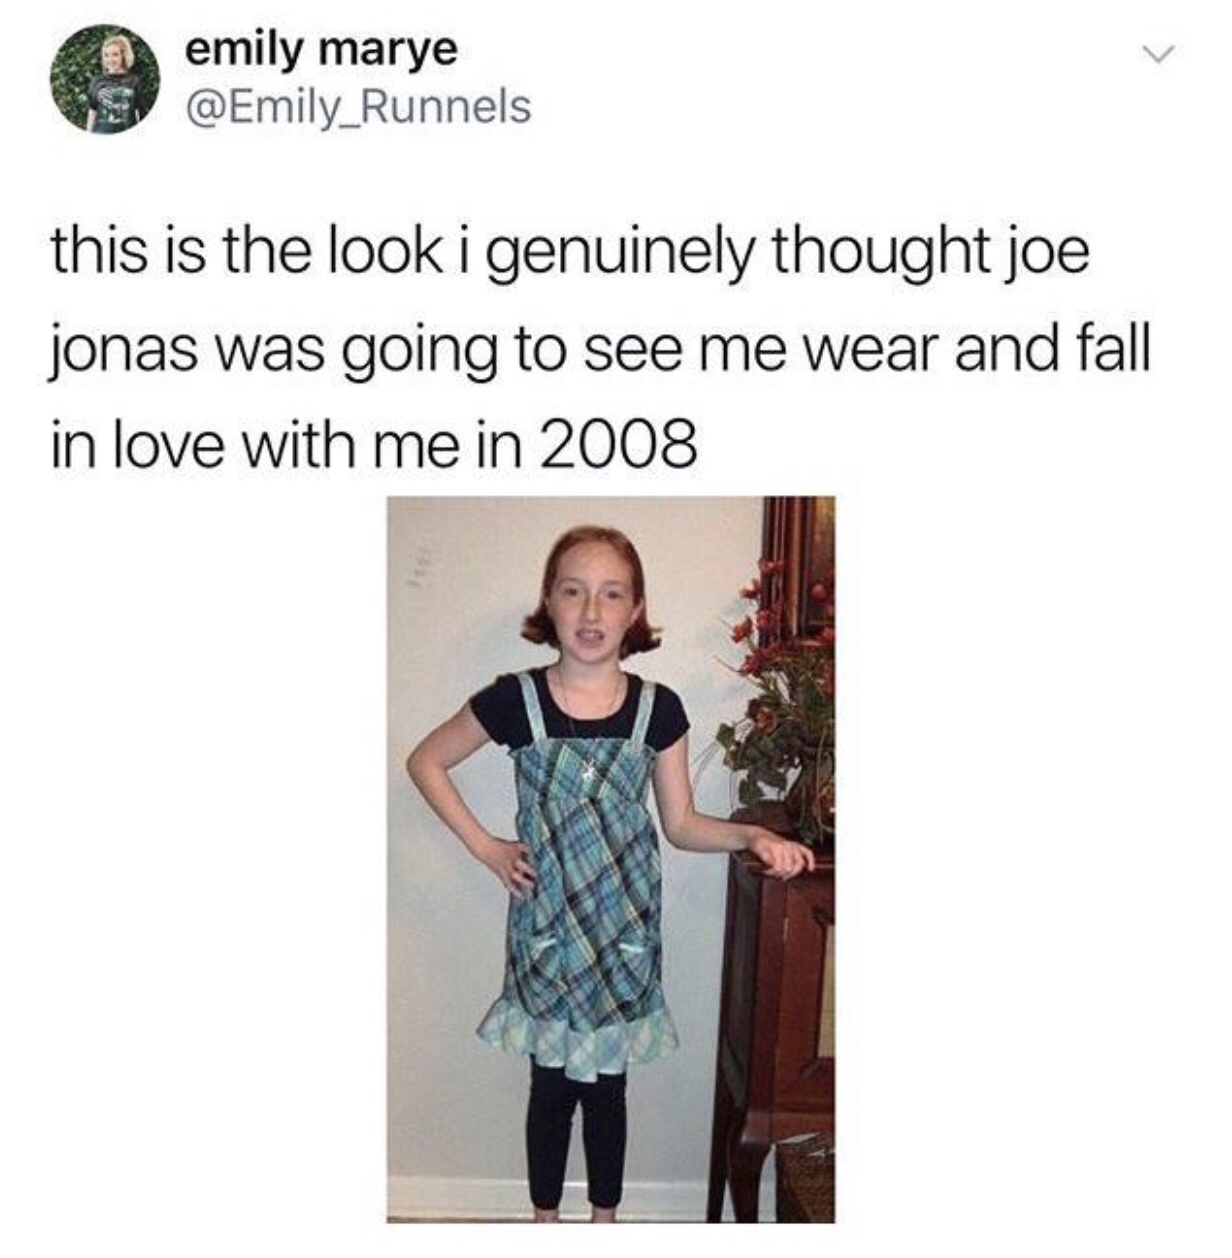 dank memes - memes about middle school - emily marye this is the look i genuinely thought joe jonas was going to see me wear and fall in love with me in 2008